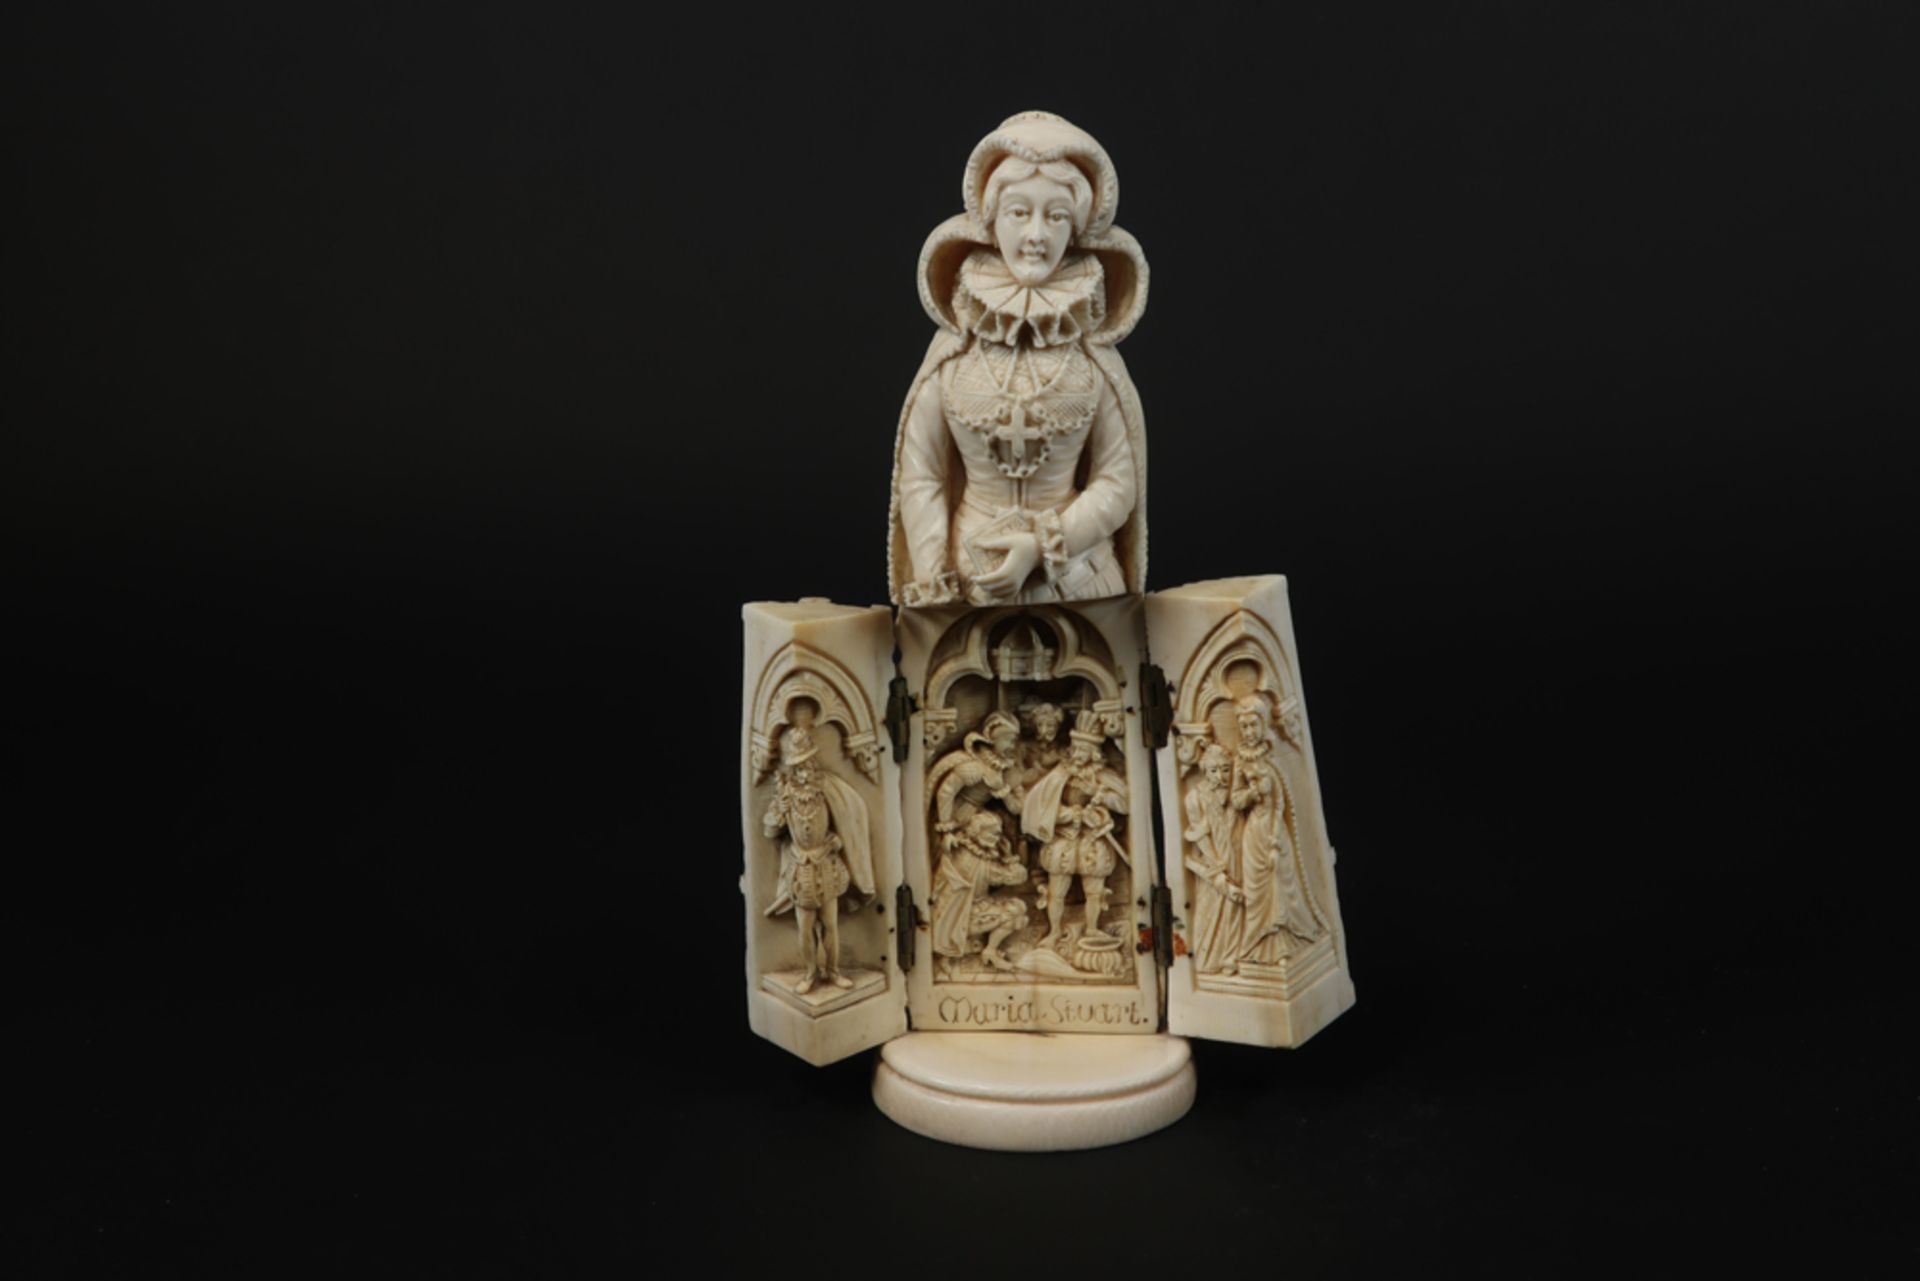 19th Cent European, presumably German, sculpture in ivory depicting Mary Stuart (queen of Scots) , - Image 5 of 8